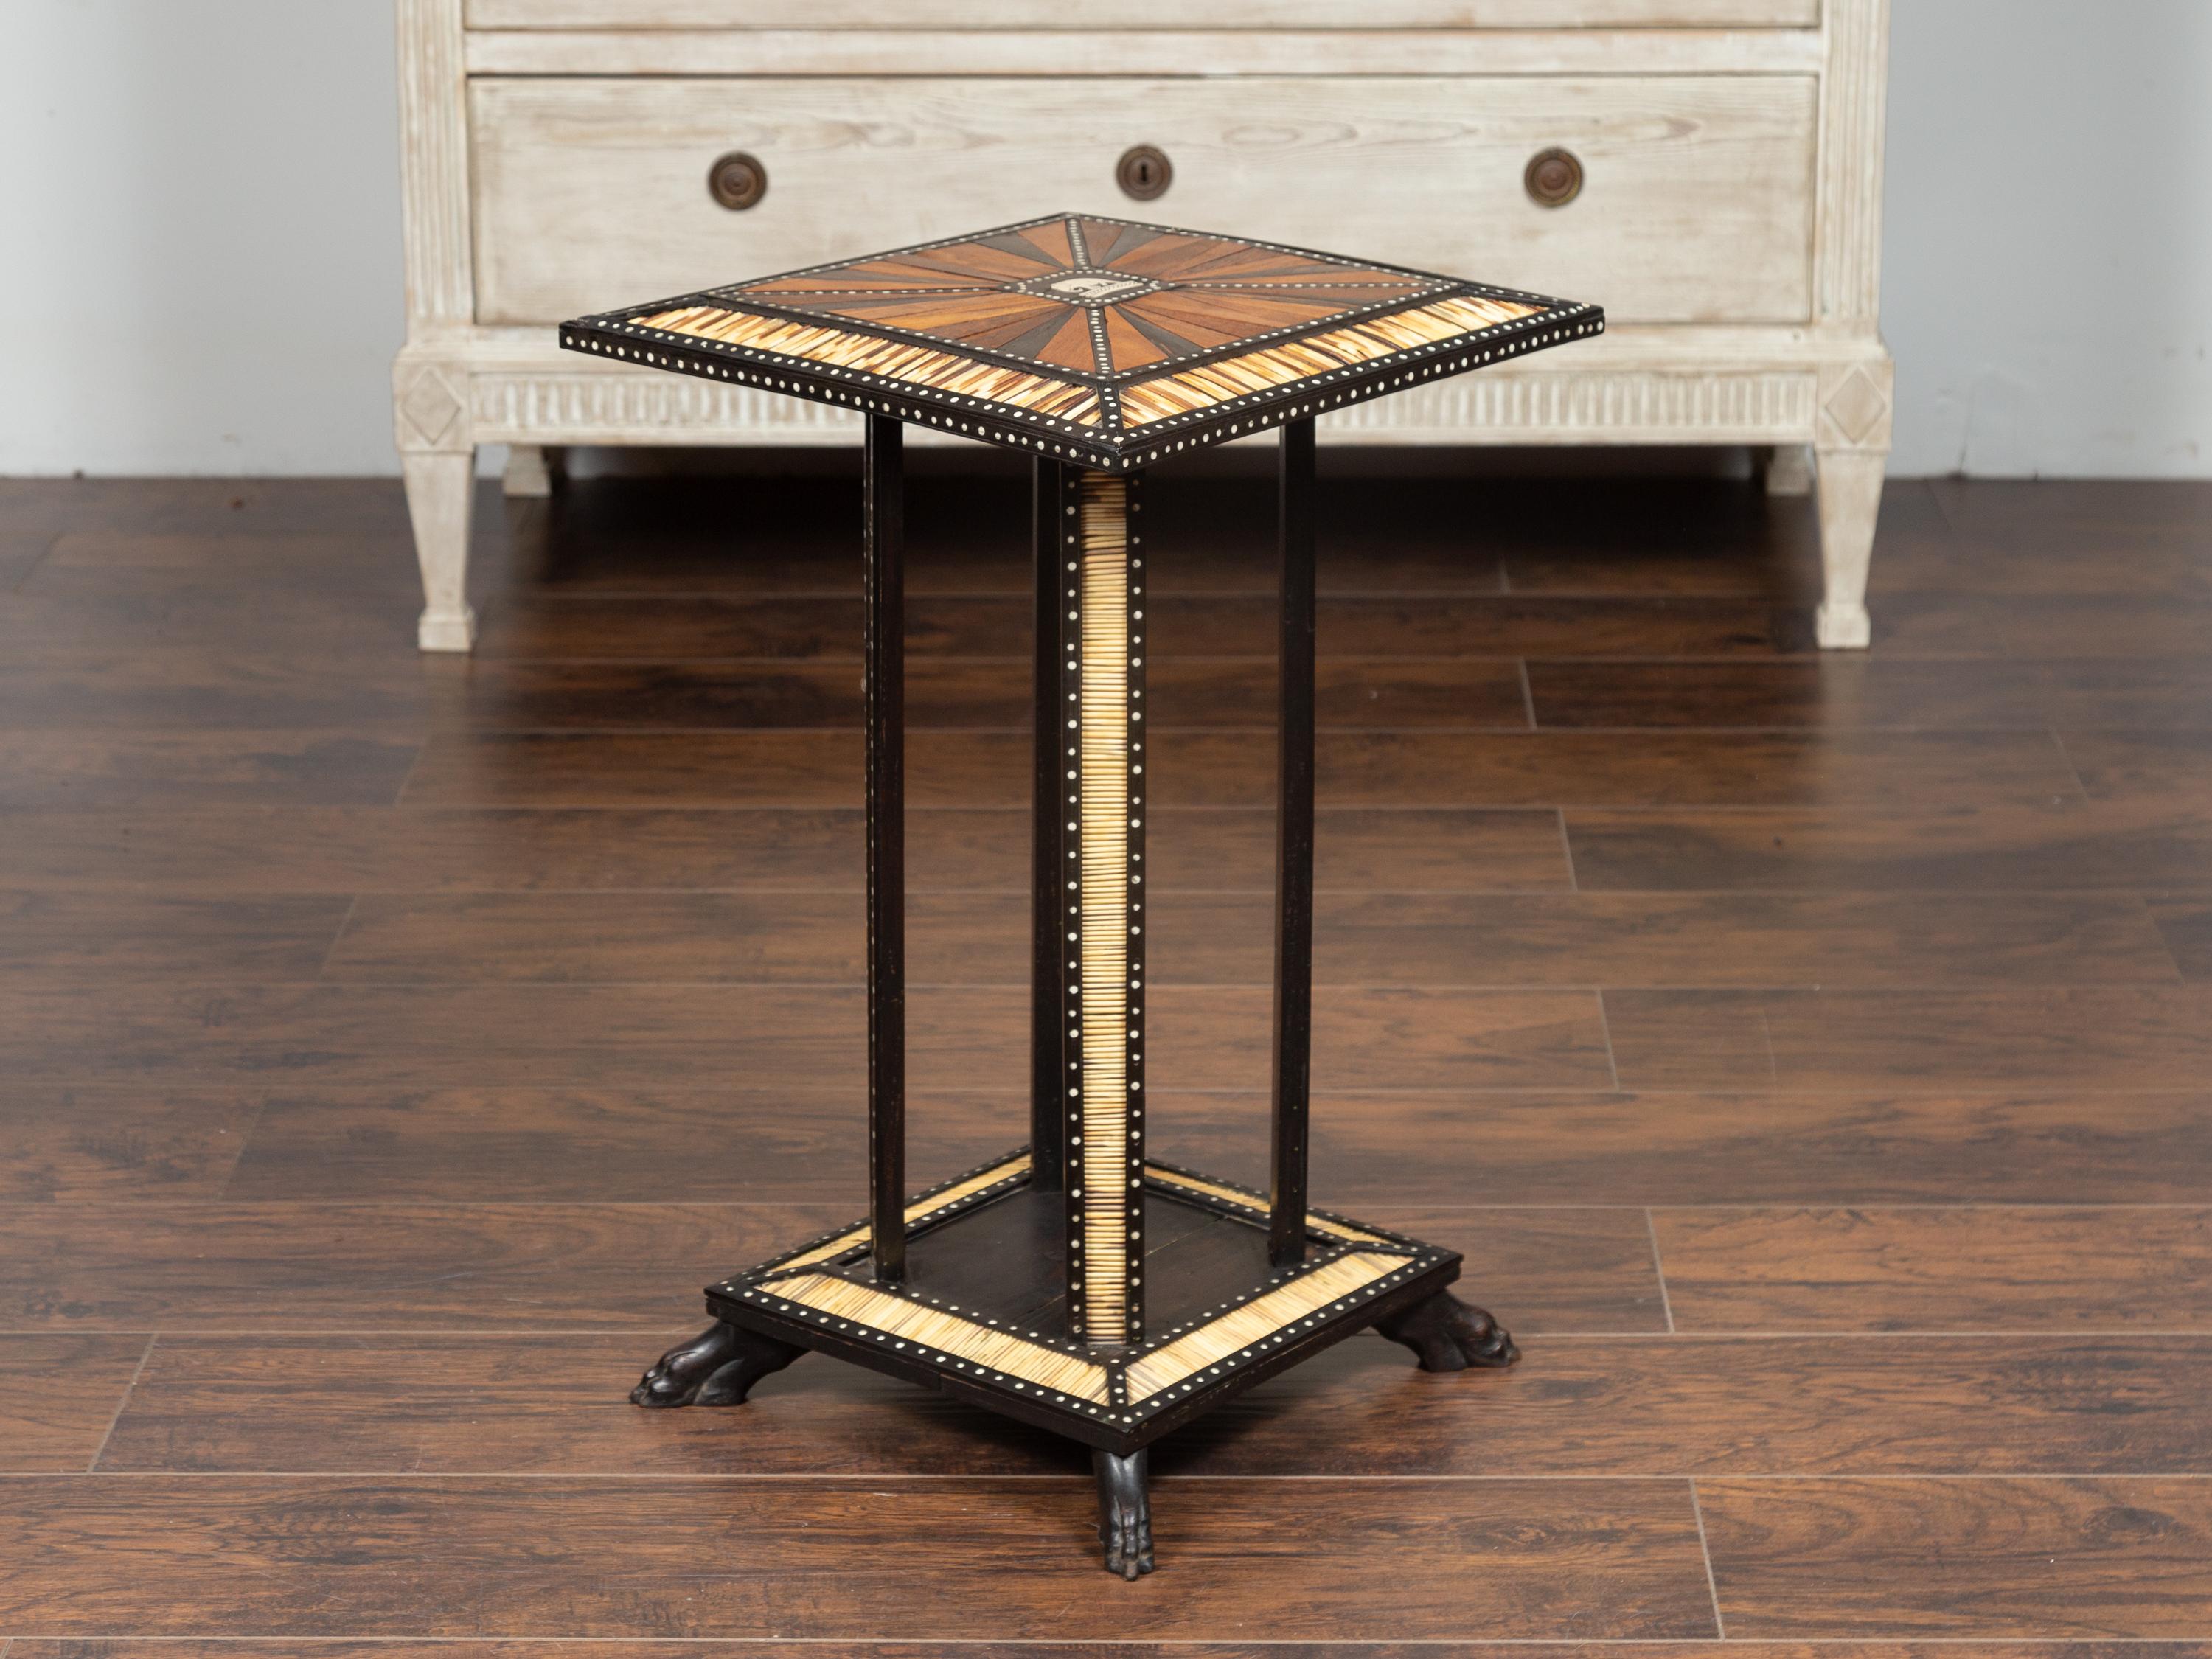 An Anglo Indian ebonized side table from the early 20th century, with porcupine quill inlay and elephant motif. Born at the Turn of the Century, this exquisite and table features a square top with beveled edges, beautifully adorned with a central